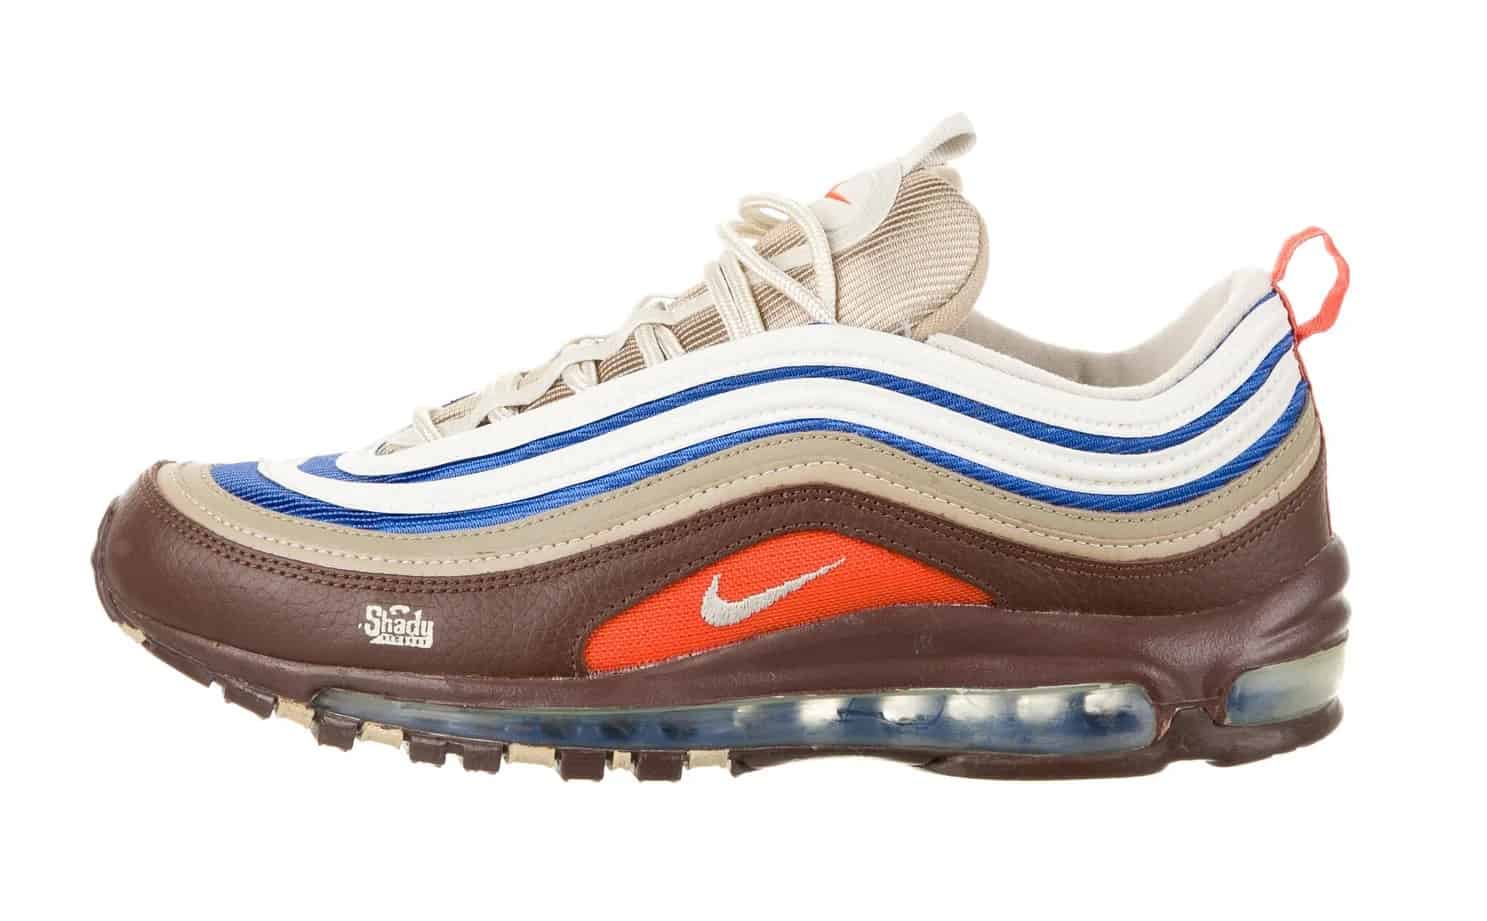 Eminem's Rare Shady Records Nike Air Max 97 Goes On Sale For A Massive Price